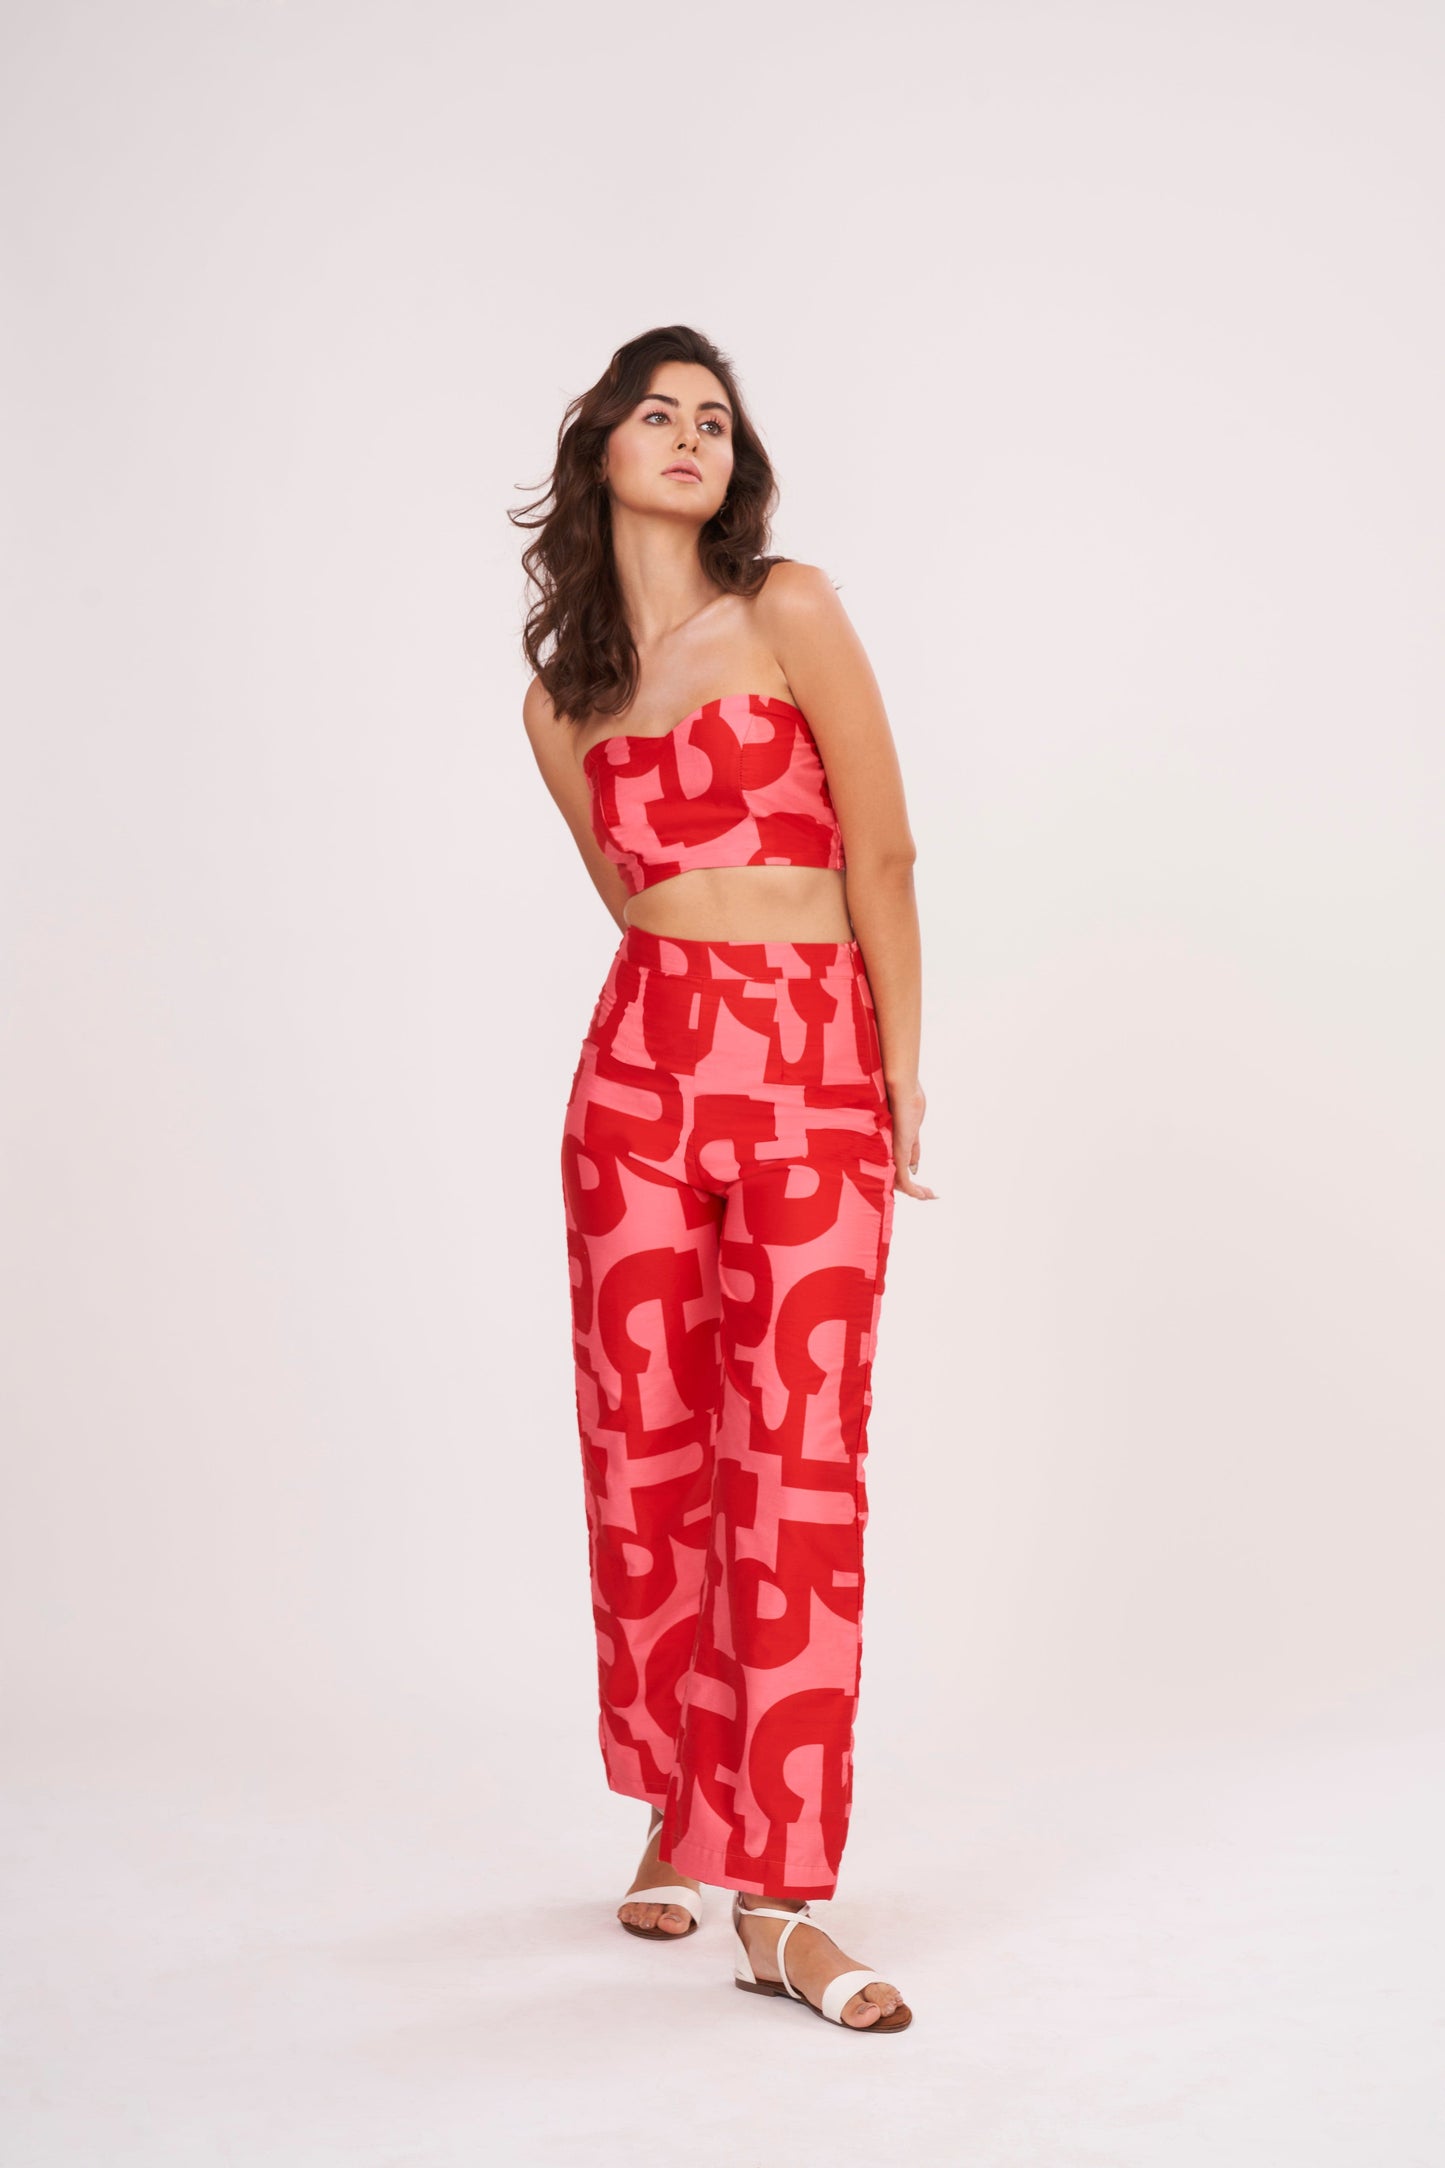 Pink-red geometric print Palazzo pants in lightweight cotton satin. Perfect for summer, mix and match for distinct looks.